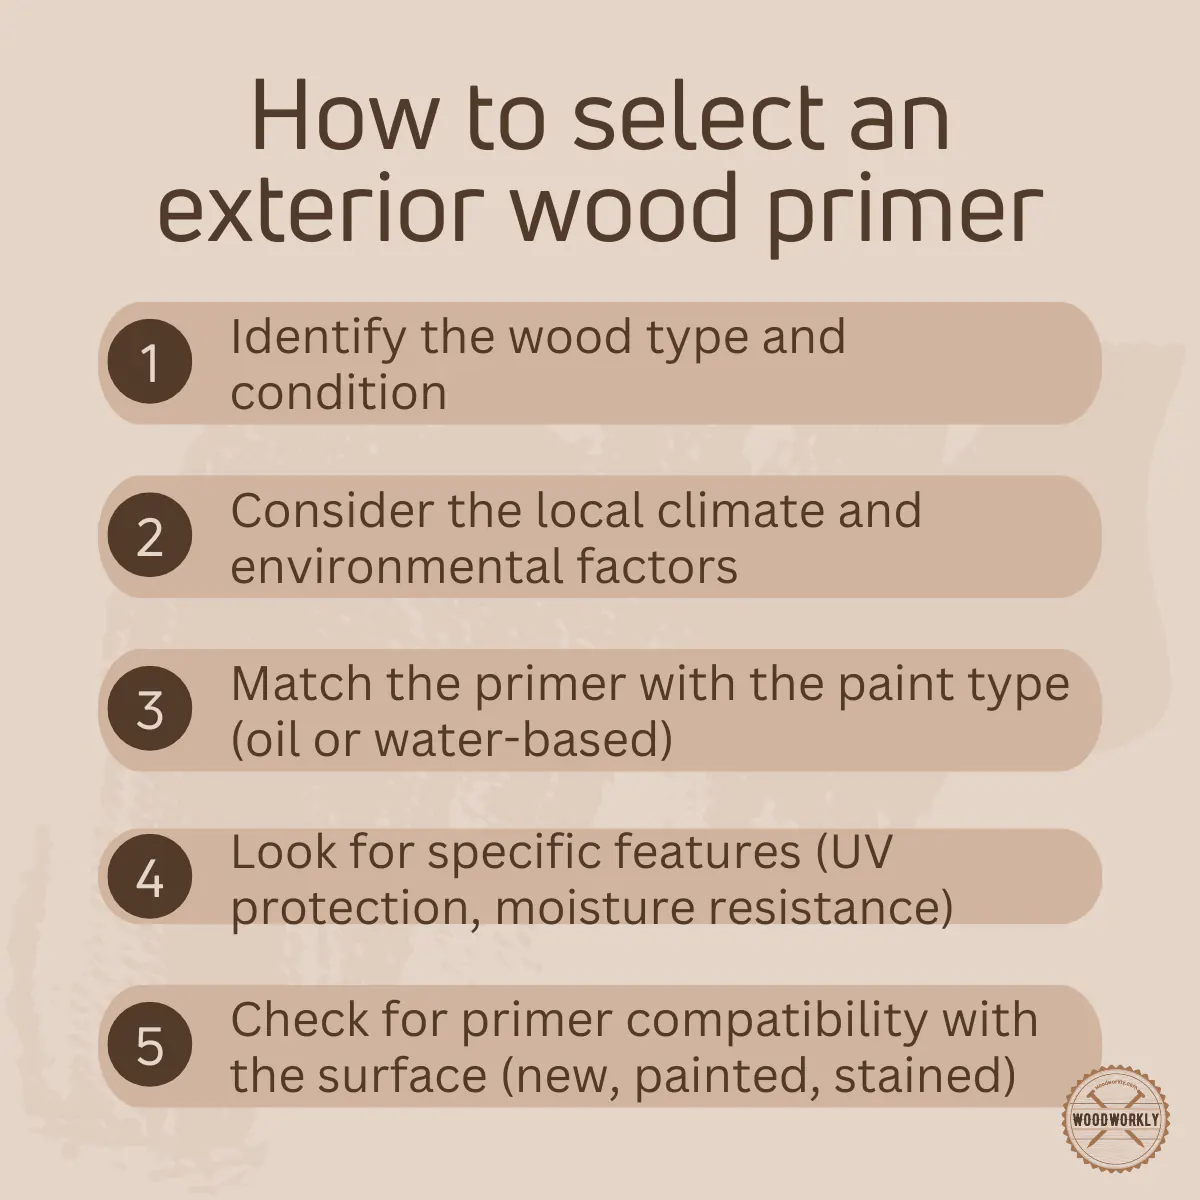 How to select an exterior wood primer